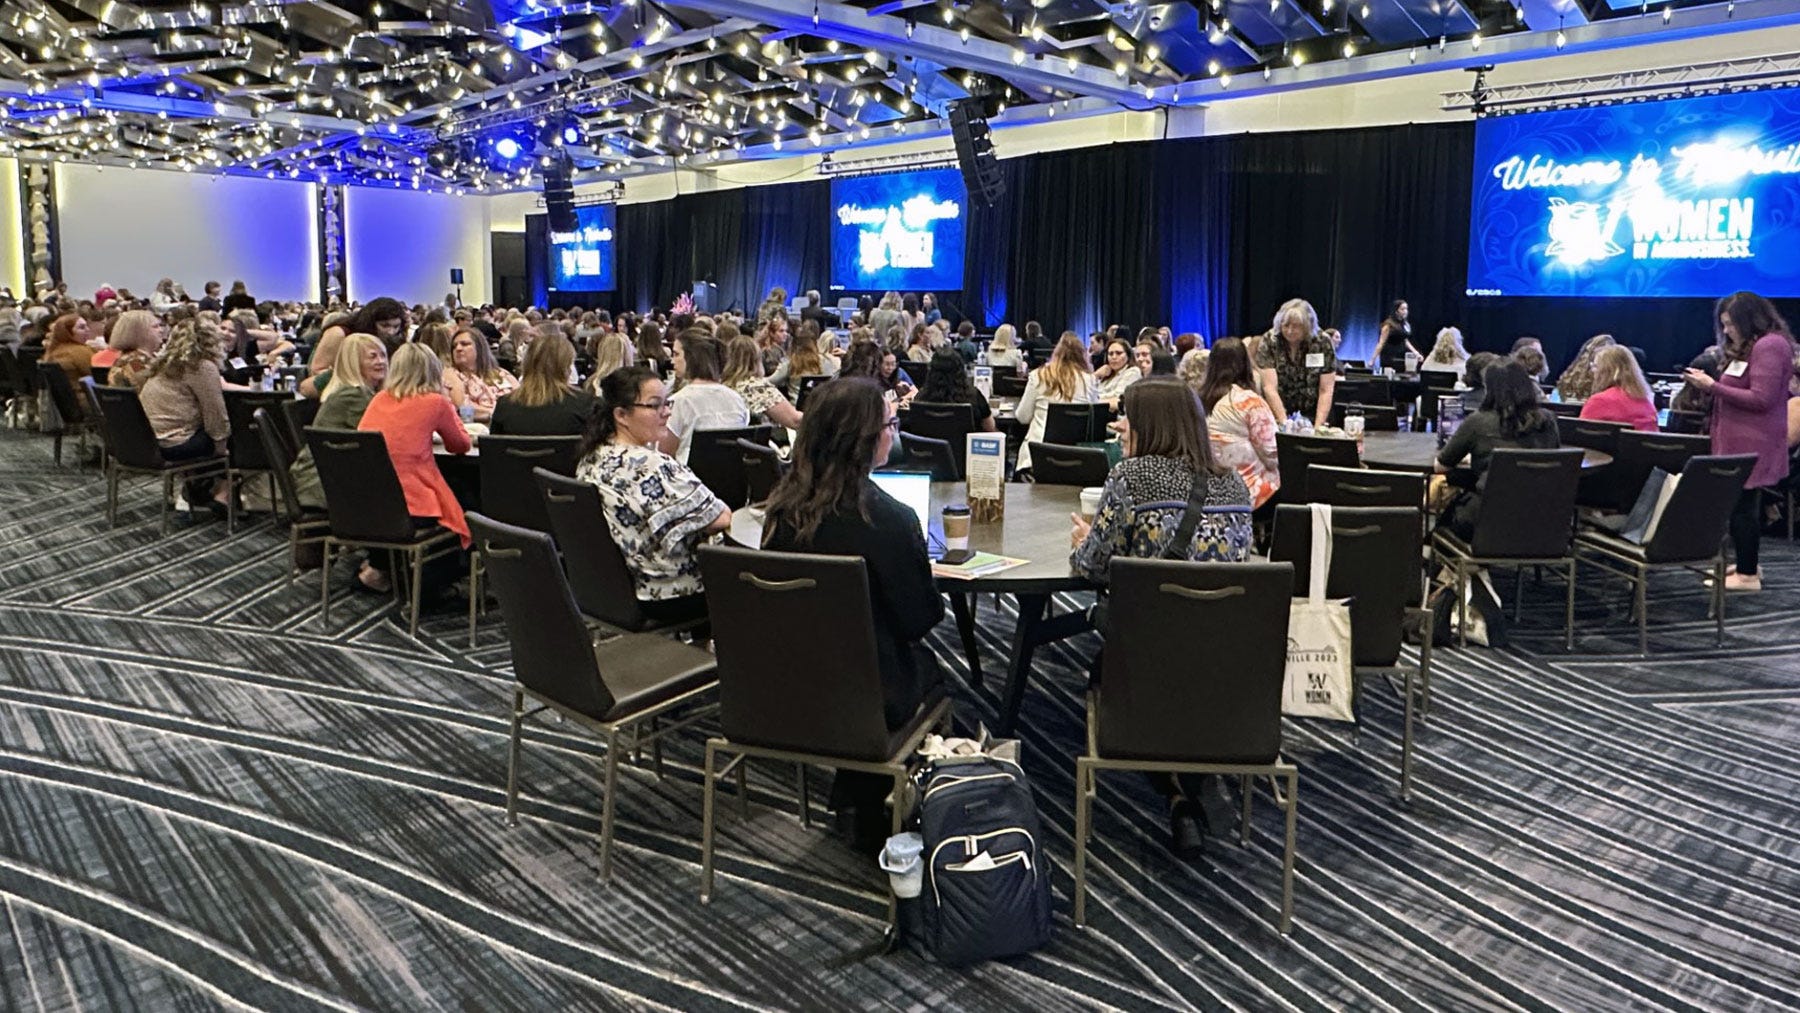 Meeting room full of women attendees at a conference, seated at tables with a stage and three large screens